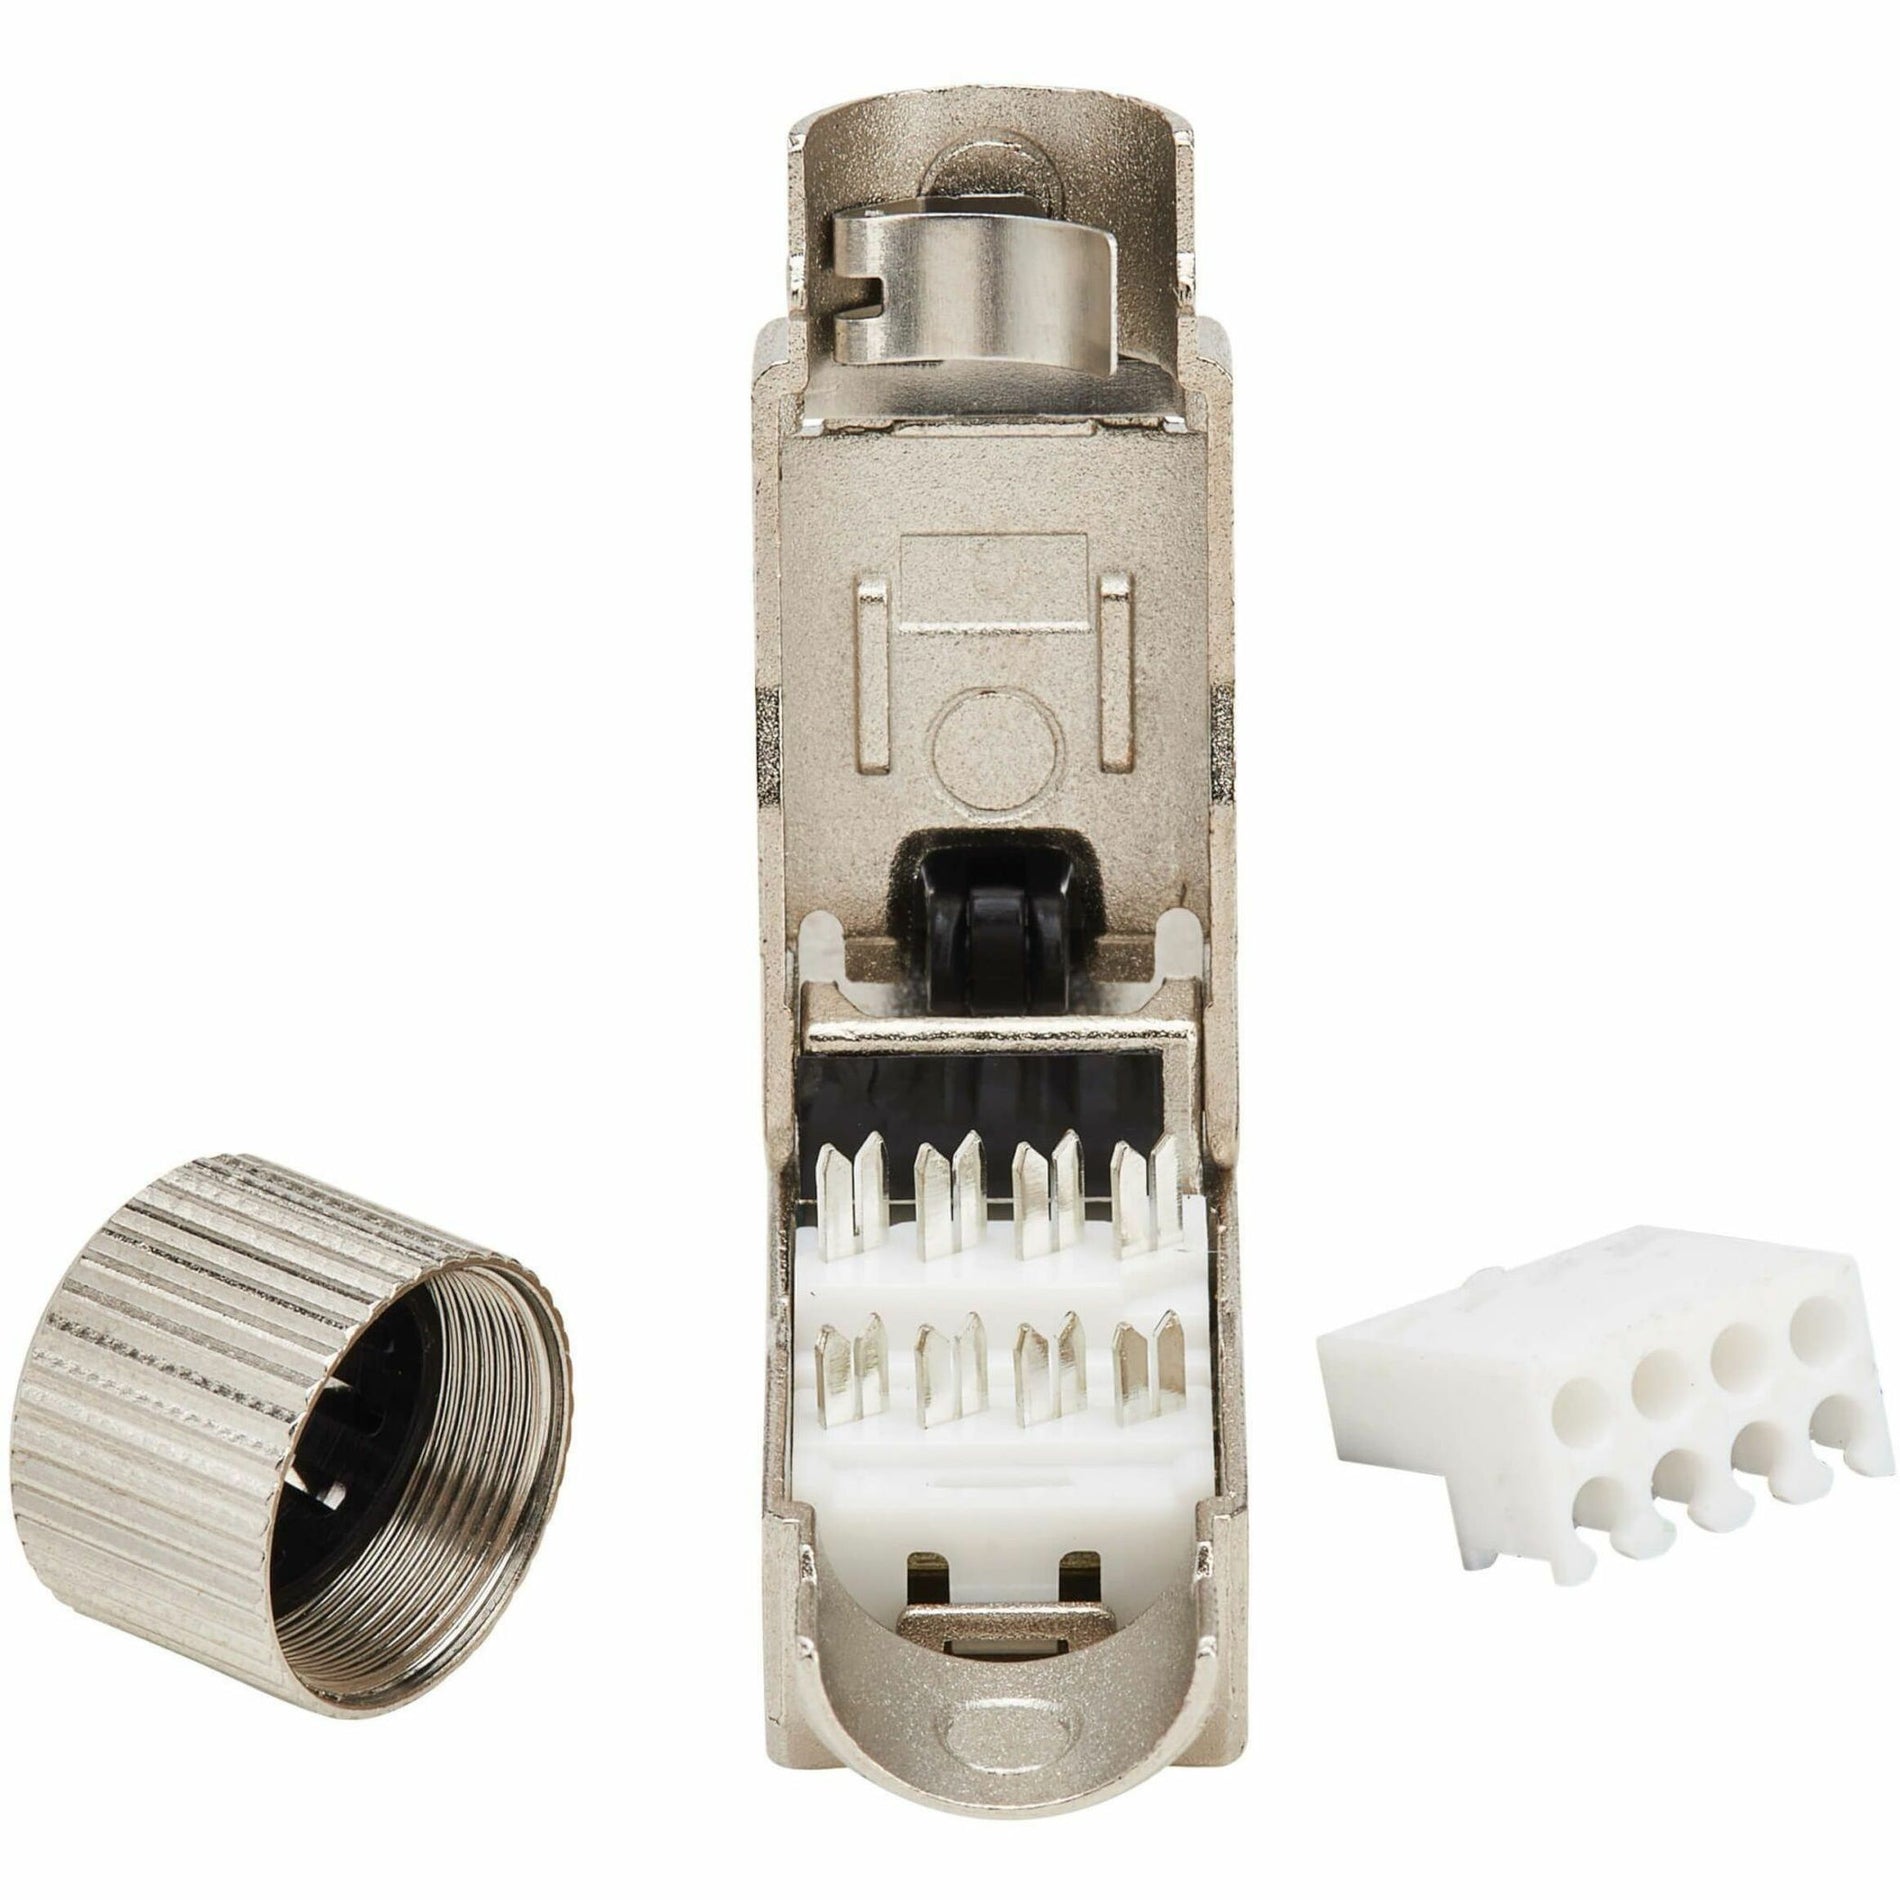 Tripp Lite N232-SHC6A-1 Cat6a Class EA STP Field-Termination Plug, 568A/568B, TAA, Stranded, EMI/RF Protection, 4-Pair Power over Ethernet (4PPoE) Support, PoE, PoE++, RJ-45 Network Connector